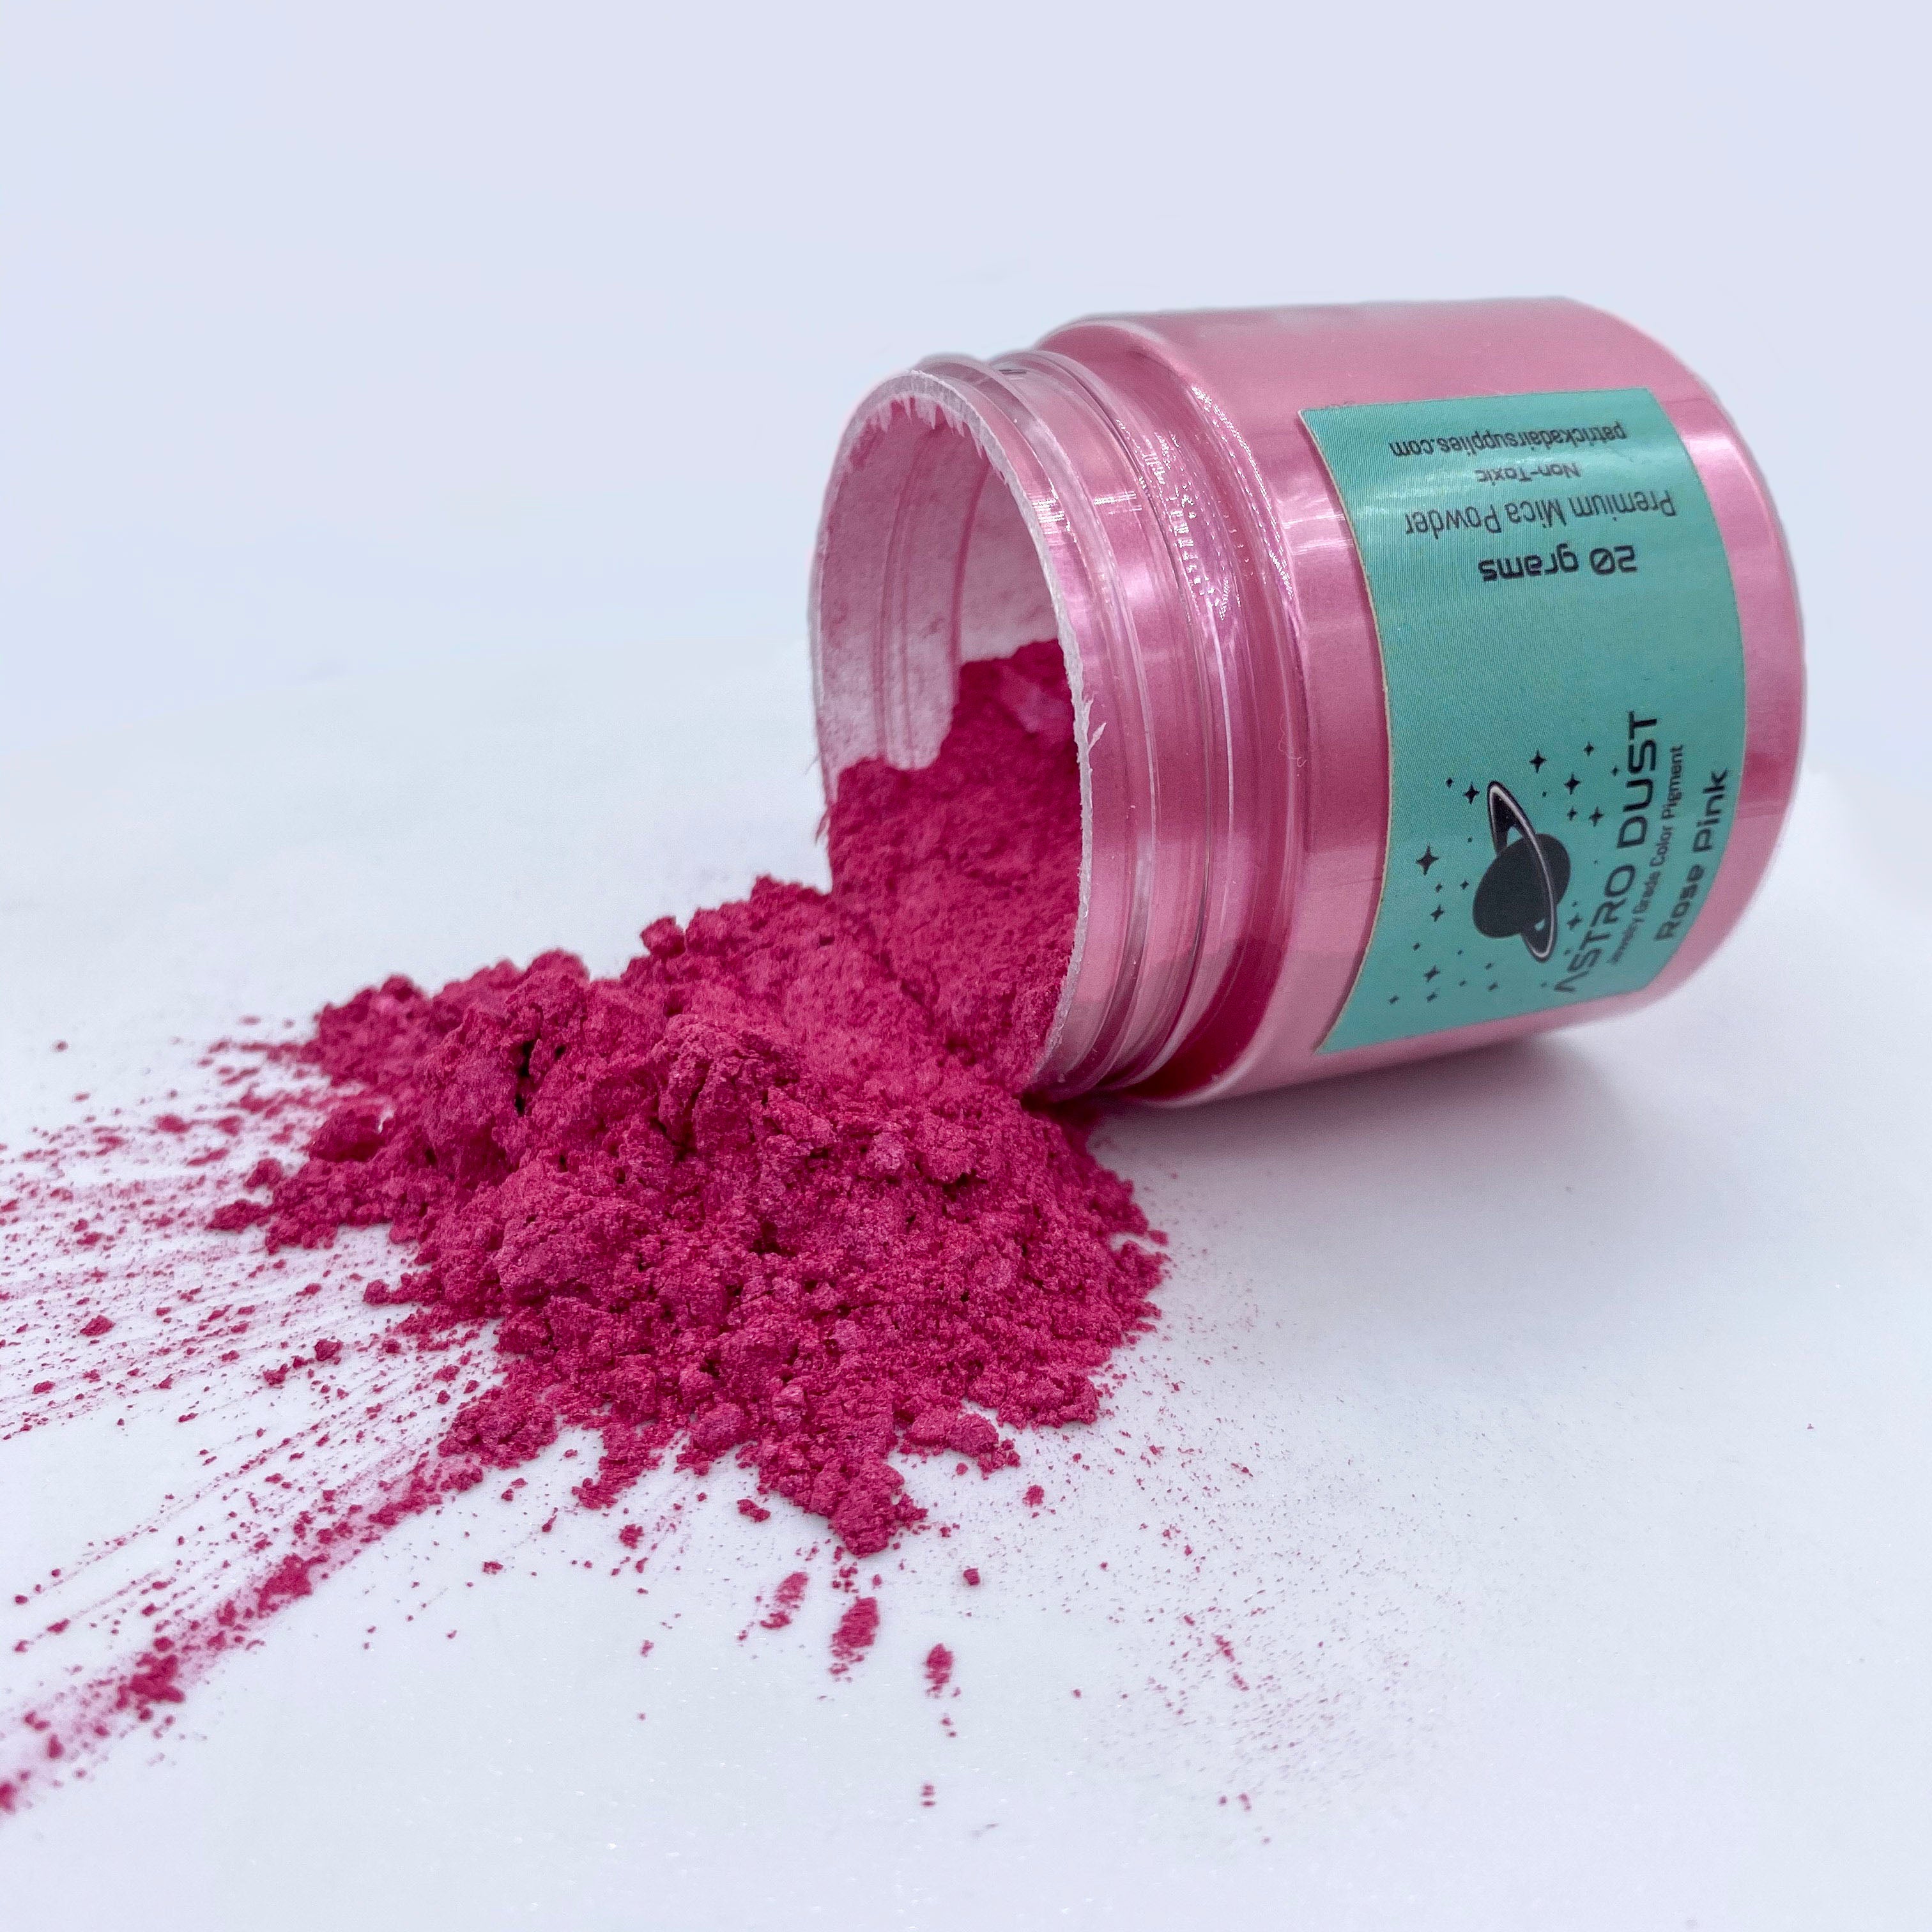 APPLE BLOSSOM PALE PINK ROSE MICA COLORANT PIGMENT POWDER COSMETIC